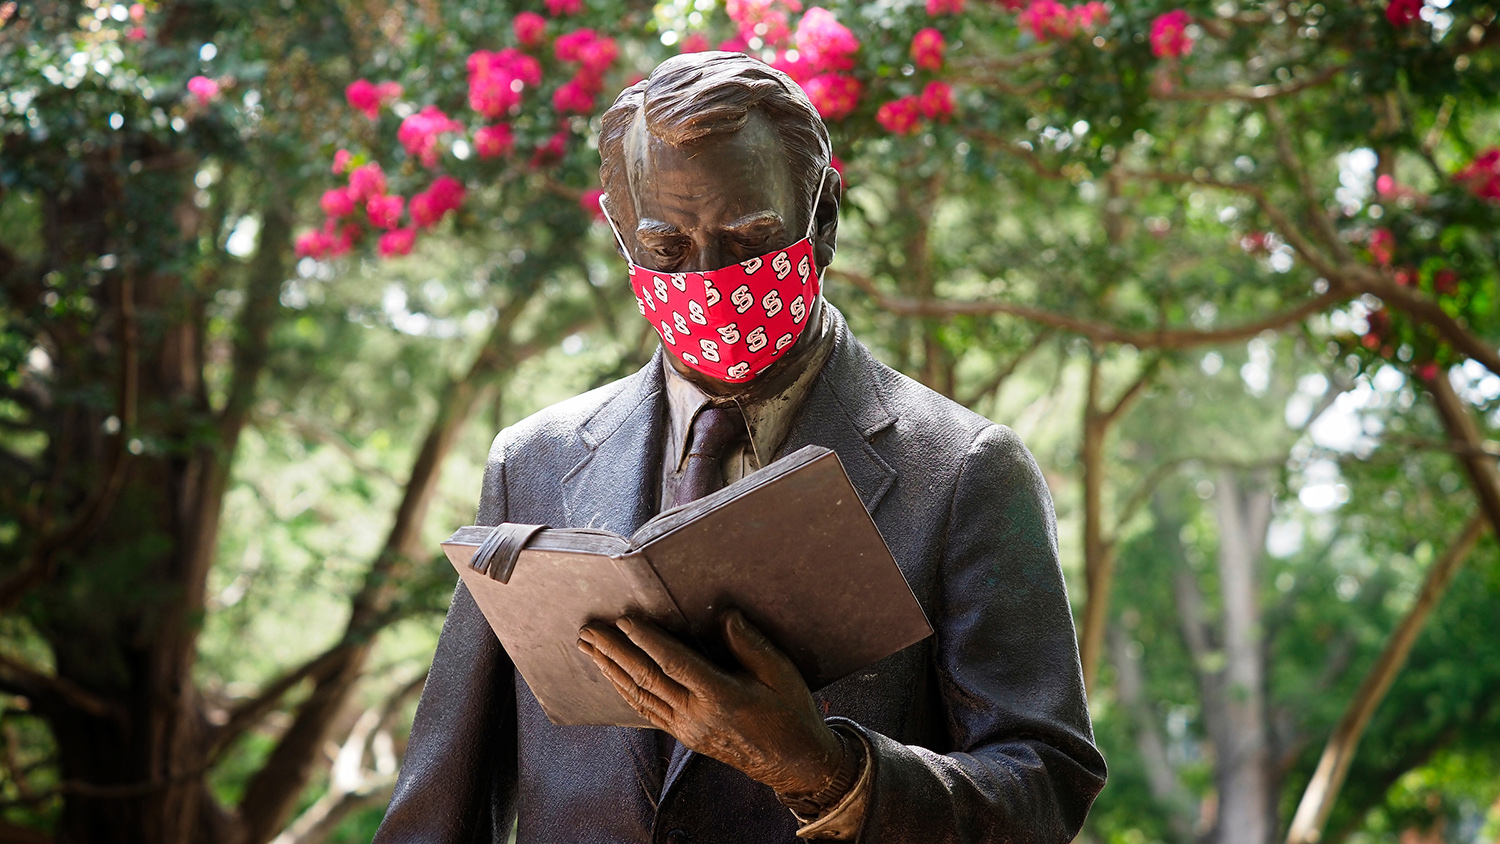 The strolling professor statue dons a protective mask